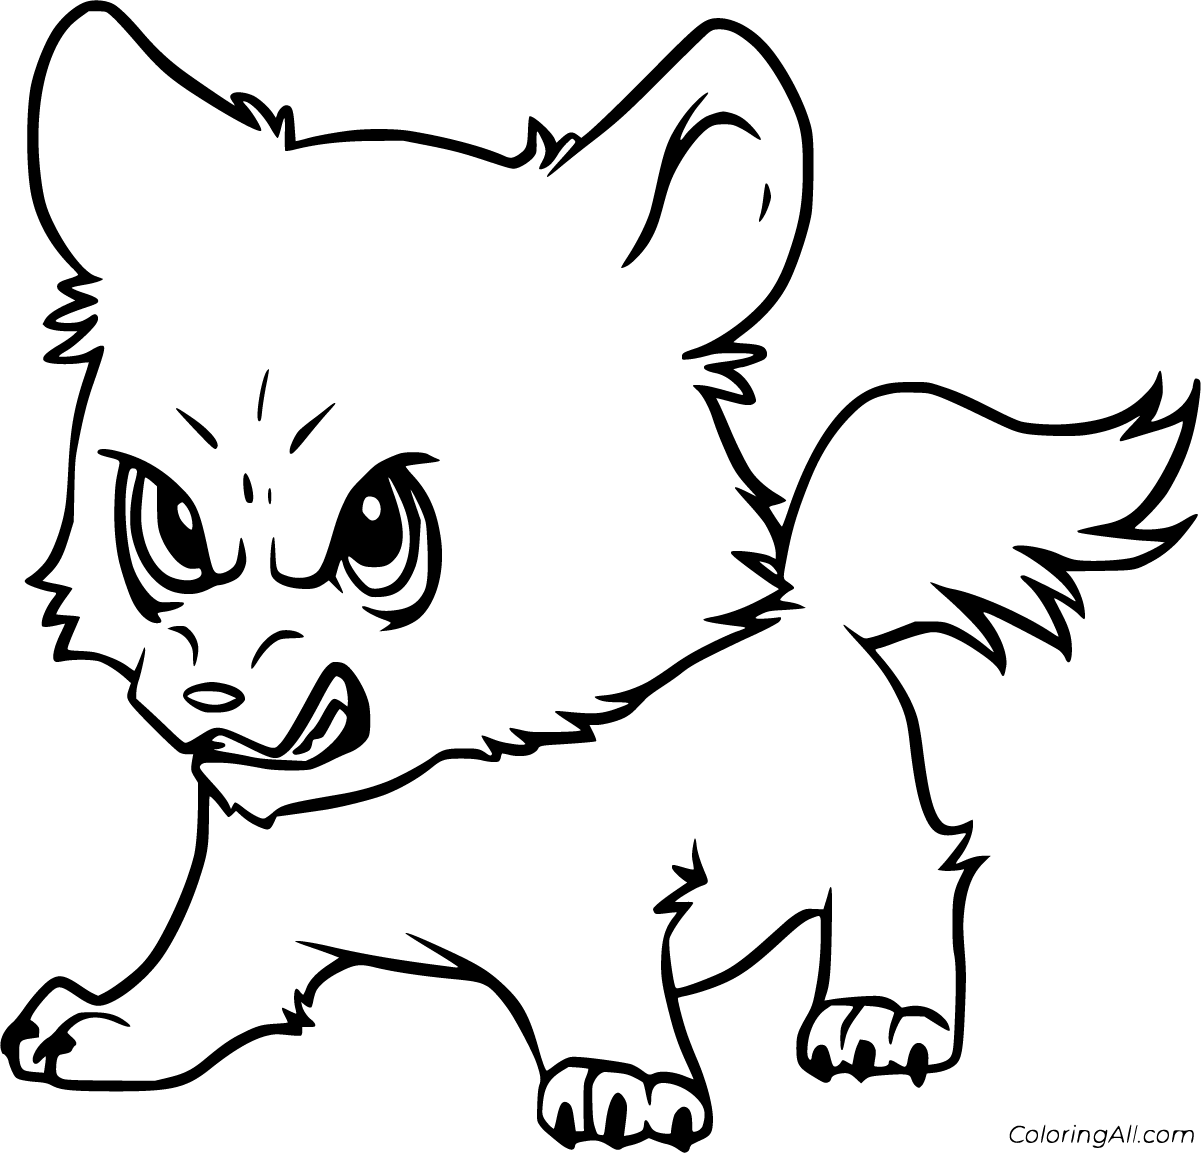 Wolf Coloring Pages   ColoringAll